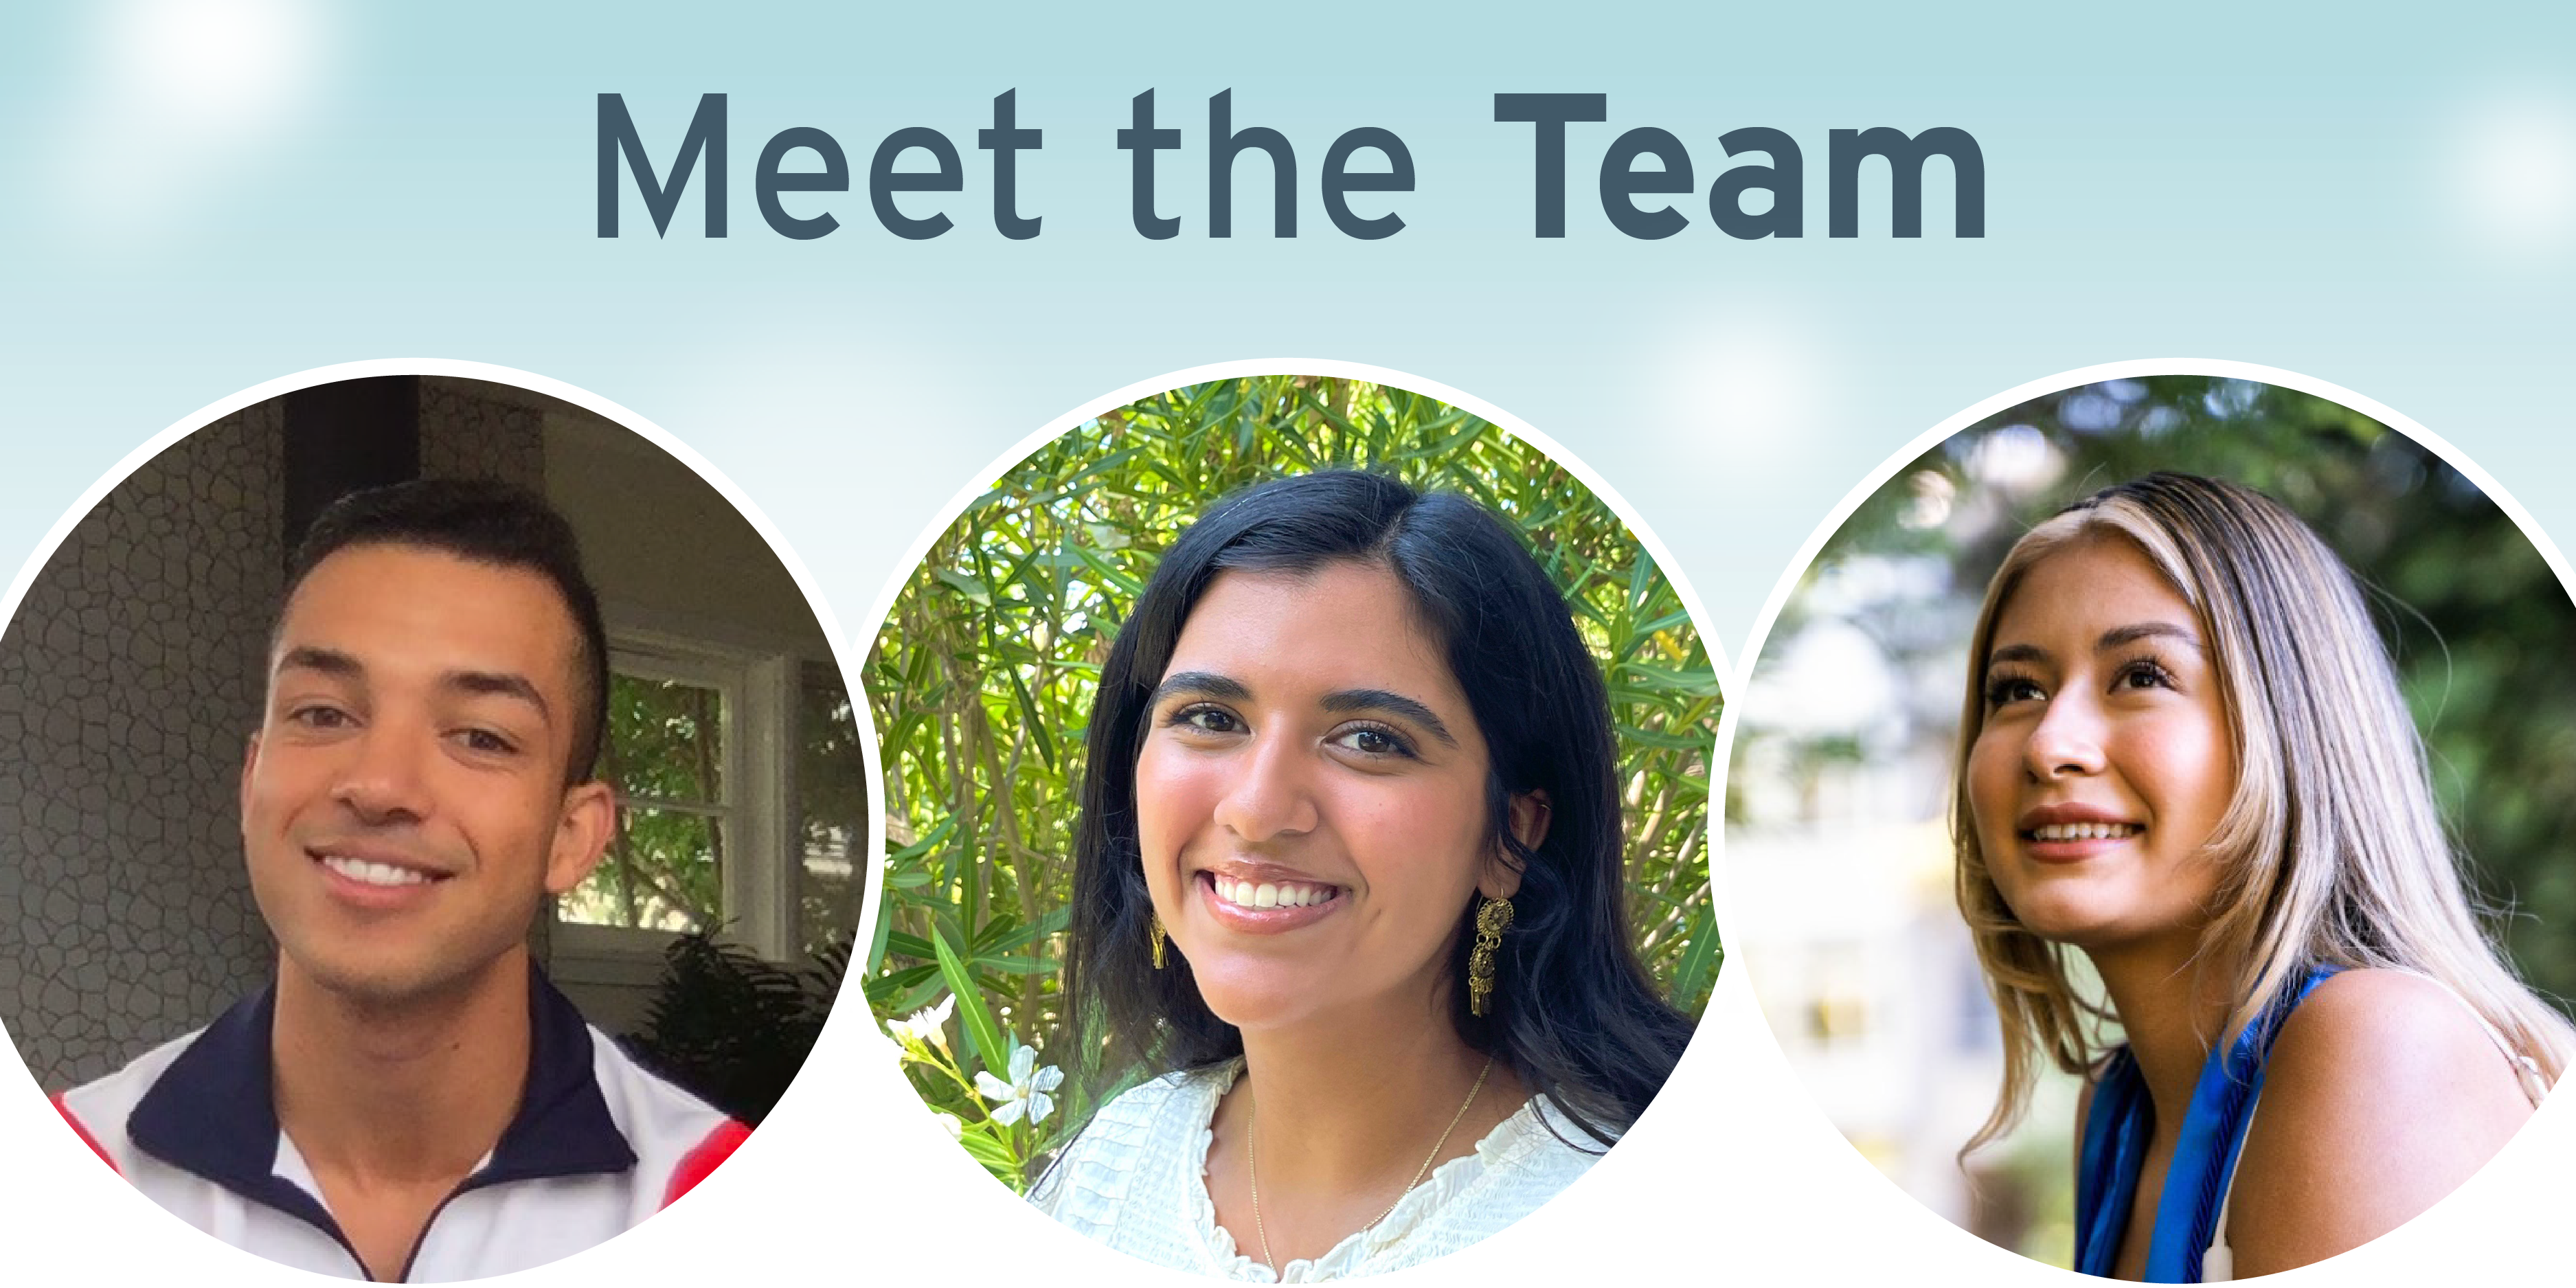 Header that states "Meet The Team" with headshots of interns Isaiah, Citlali, and Priscila